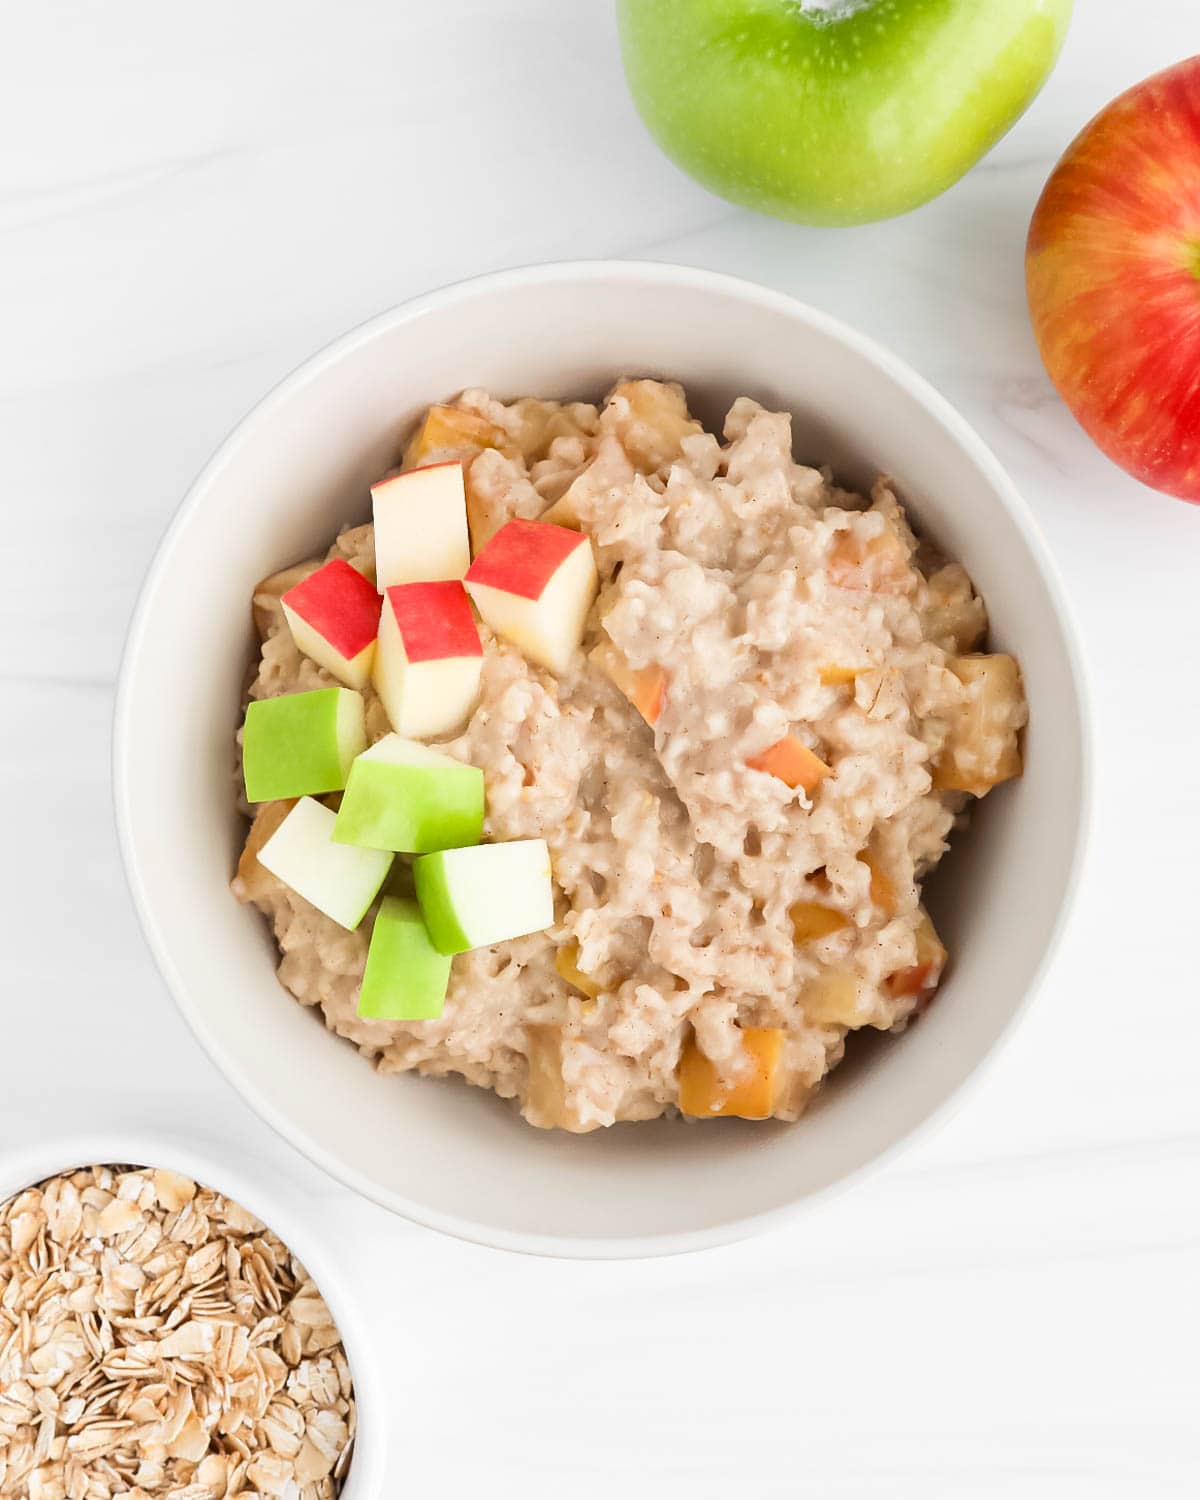 A bowl filled with cooked oatmeal and fresh apples.